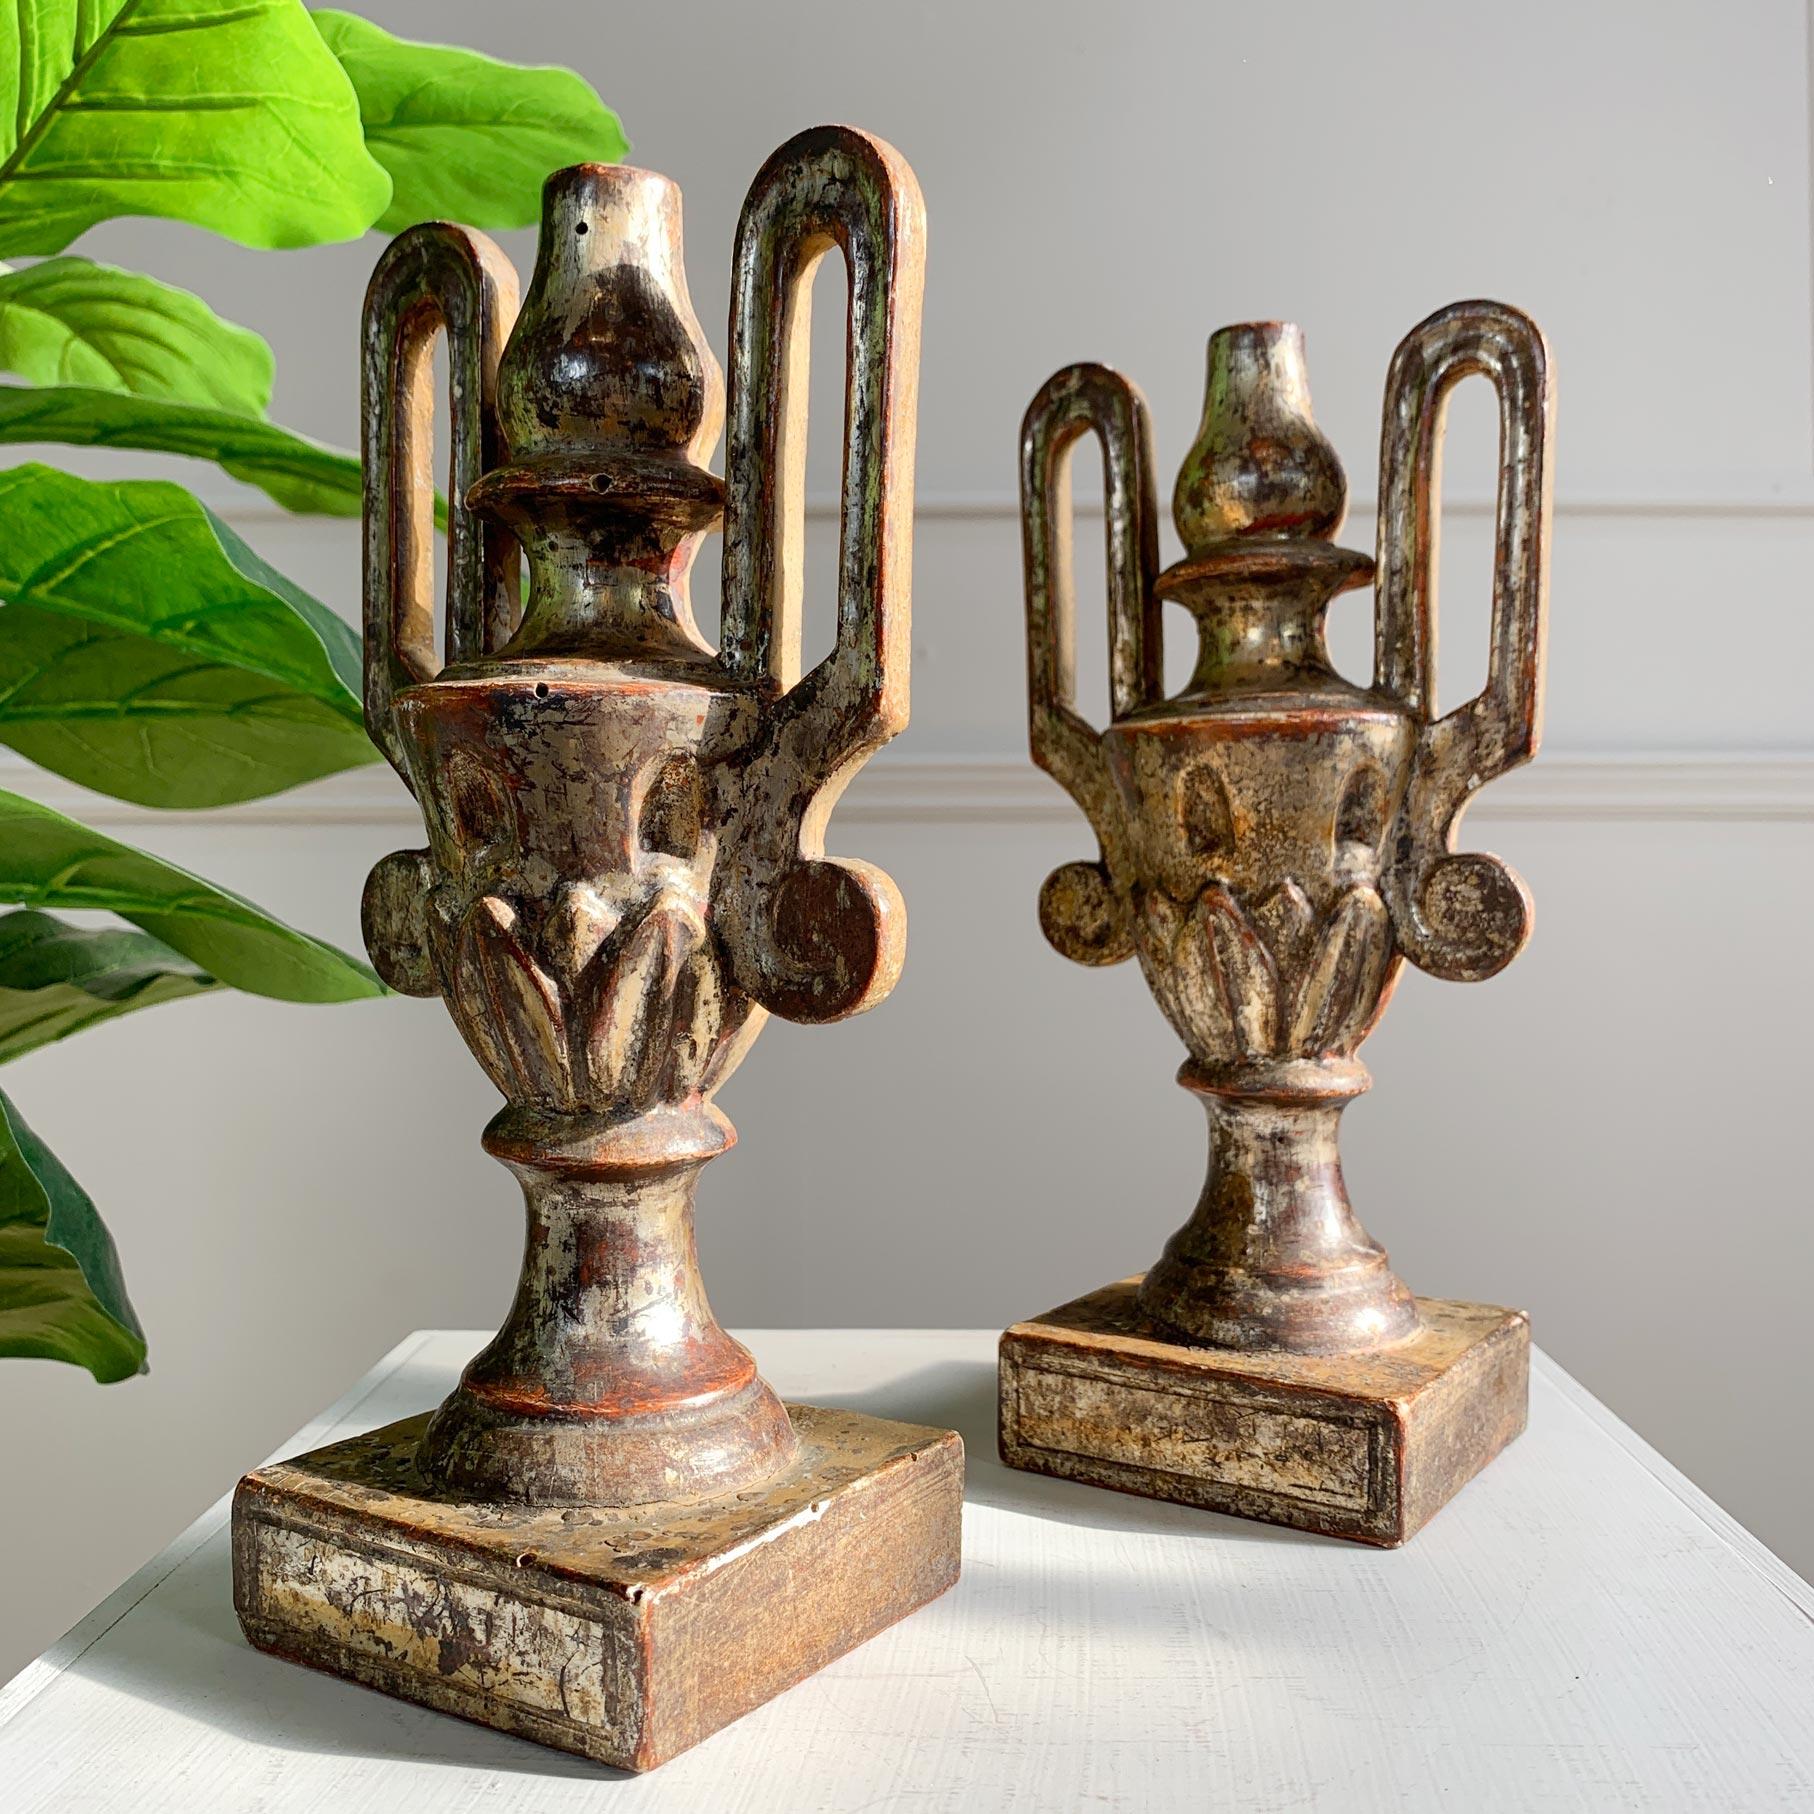 A pair of late 18th Century German baroque altar vases, in carved and gilded wood, small areas of gilt loss and patina as to be expected given their age. These would have been displayed within the altar of a German Church and are most likely